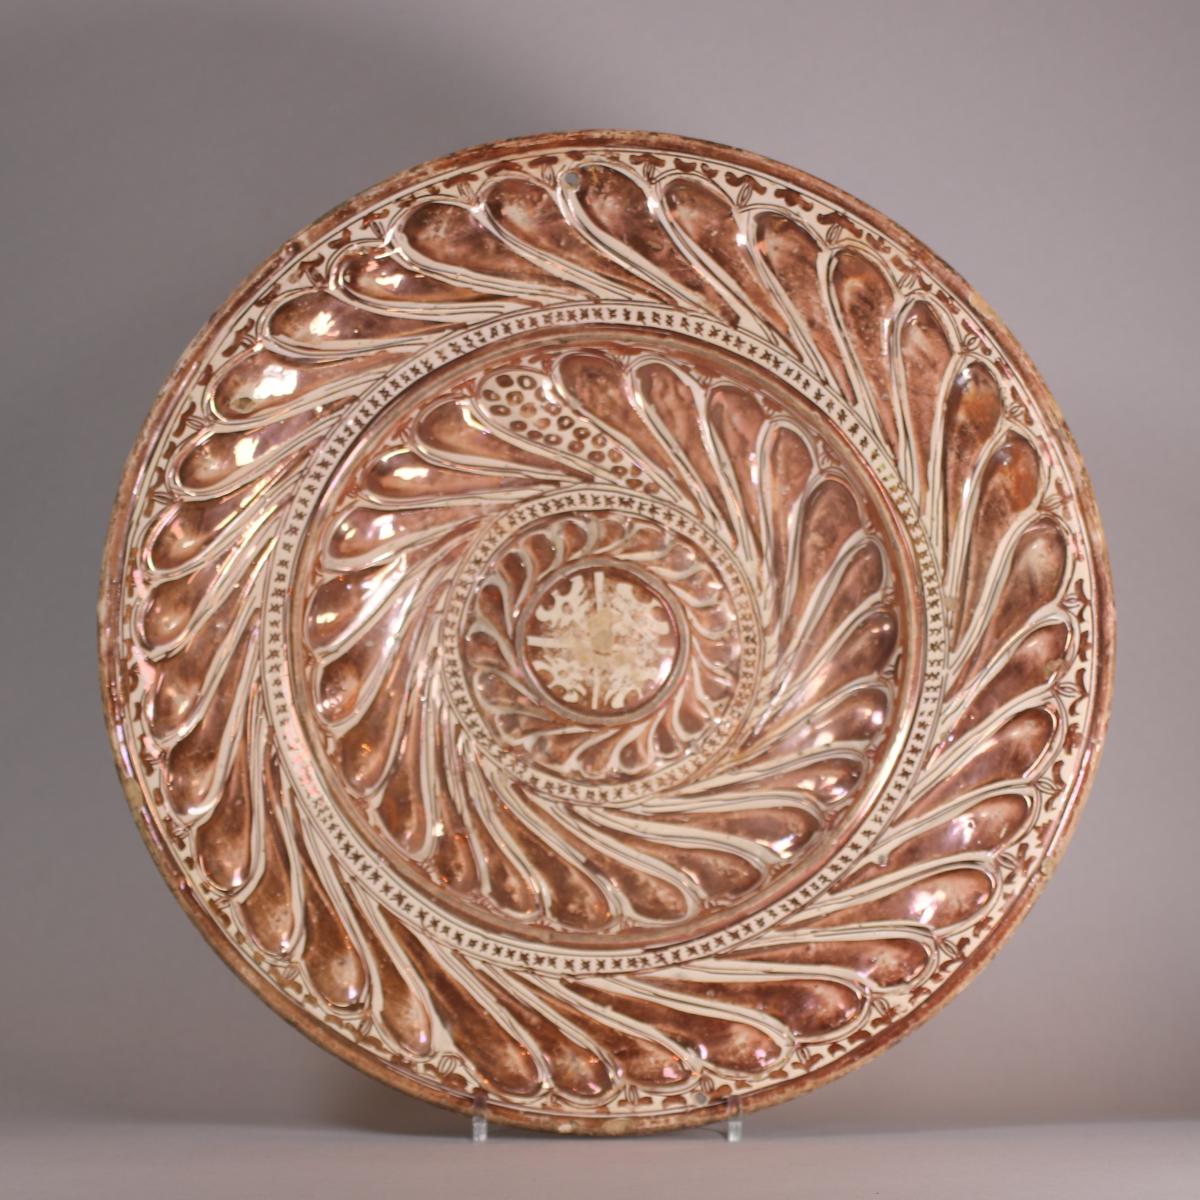 Spanish Hispano-Moresque lustre pottery charger, 16th century